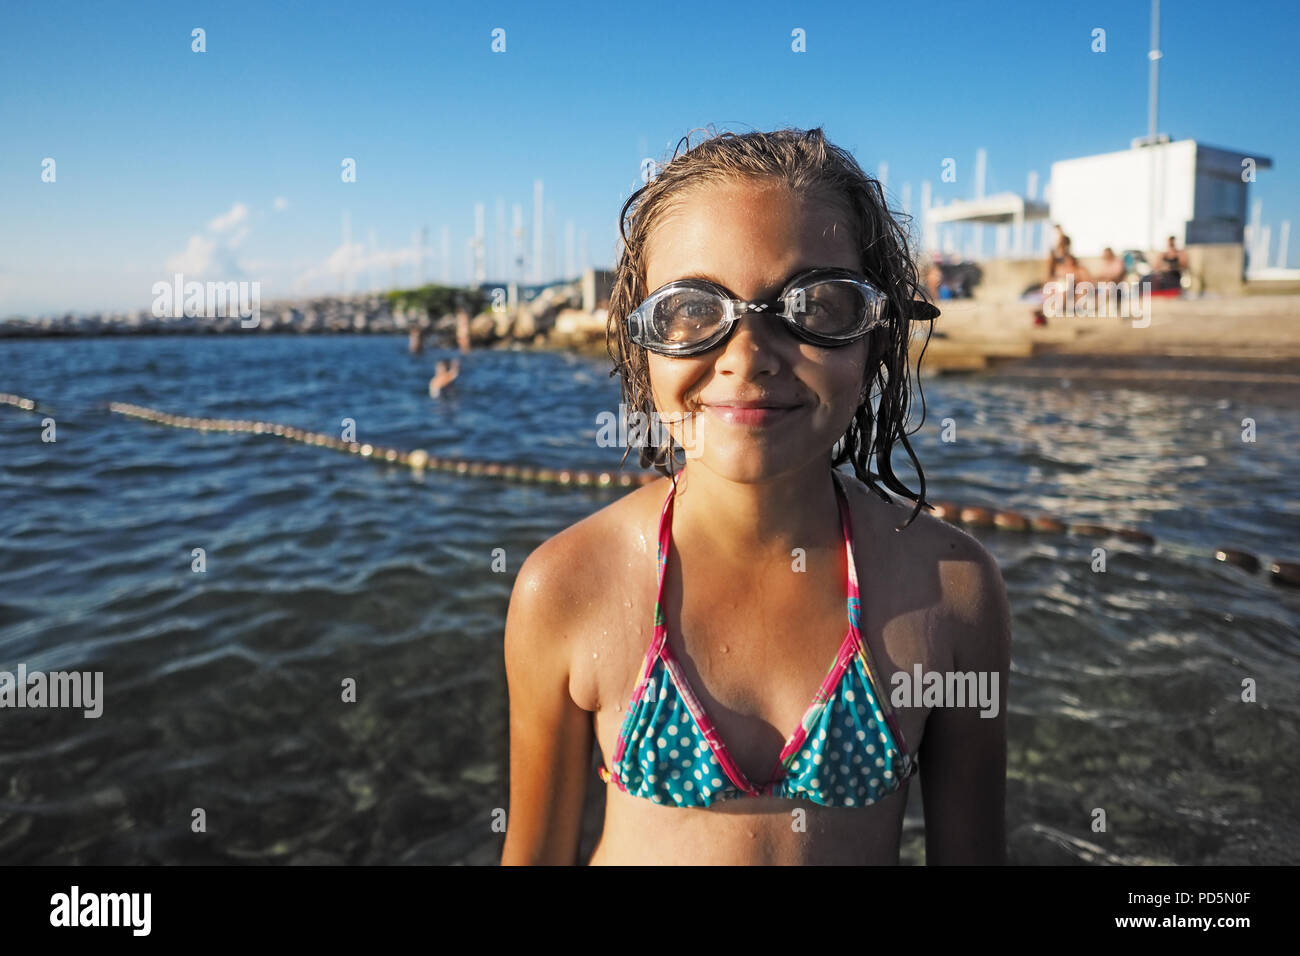 Little girl with swimming glasses Stock Photo